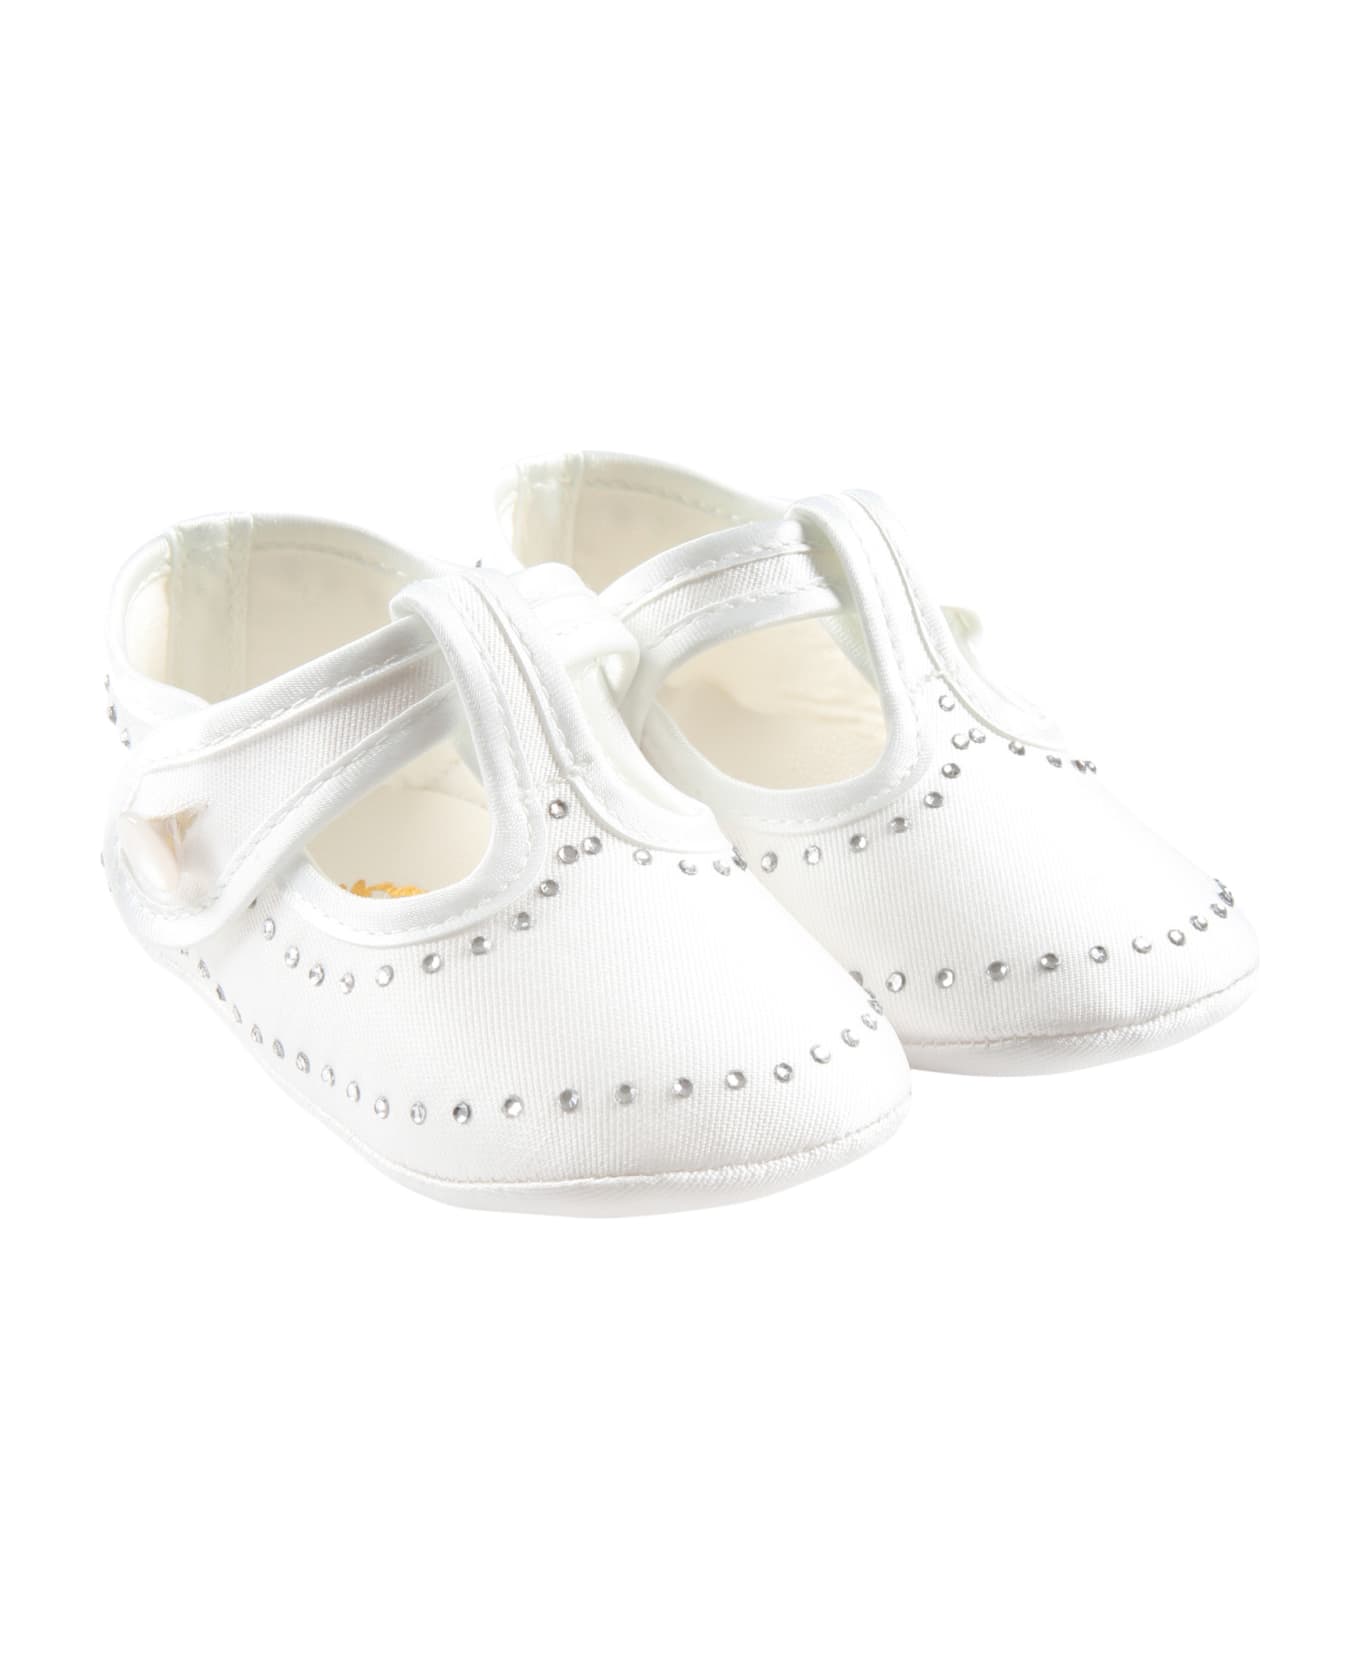 Monnalisa White Shoes For Baby Girl With Rhinestones - White